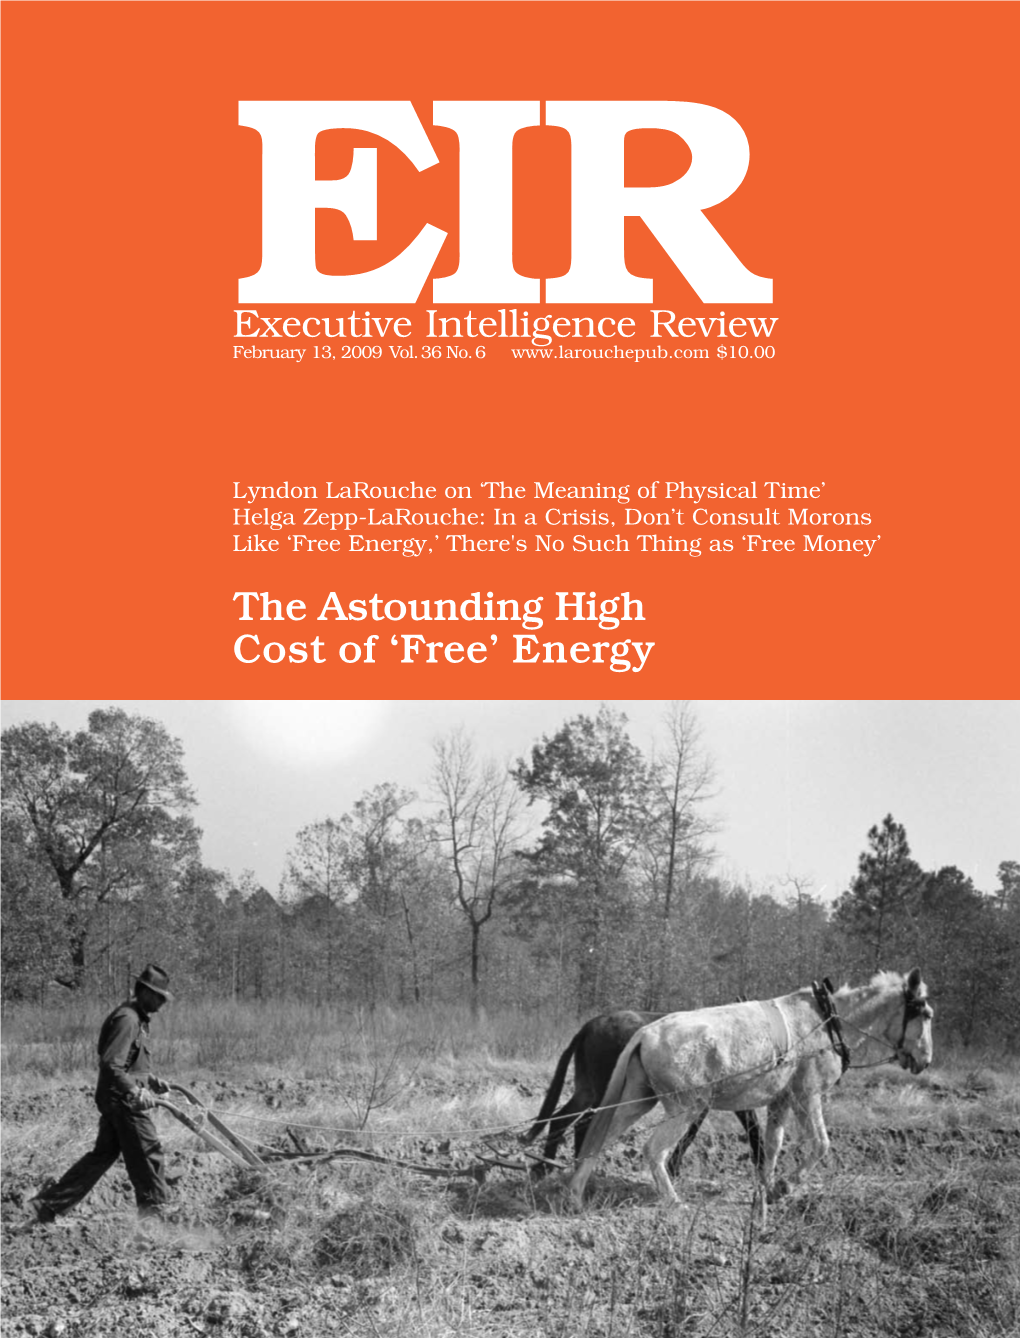 Executive Intelligence Review, Volume 36, Number 6, February 13